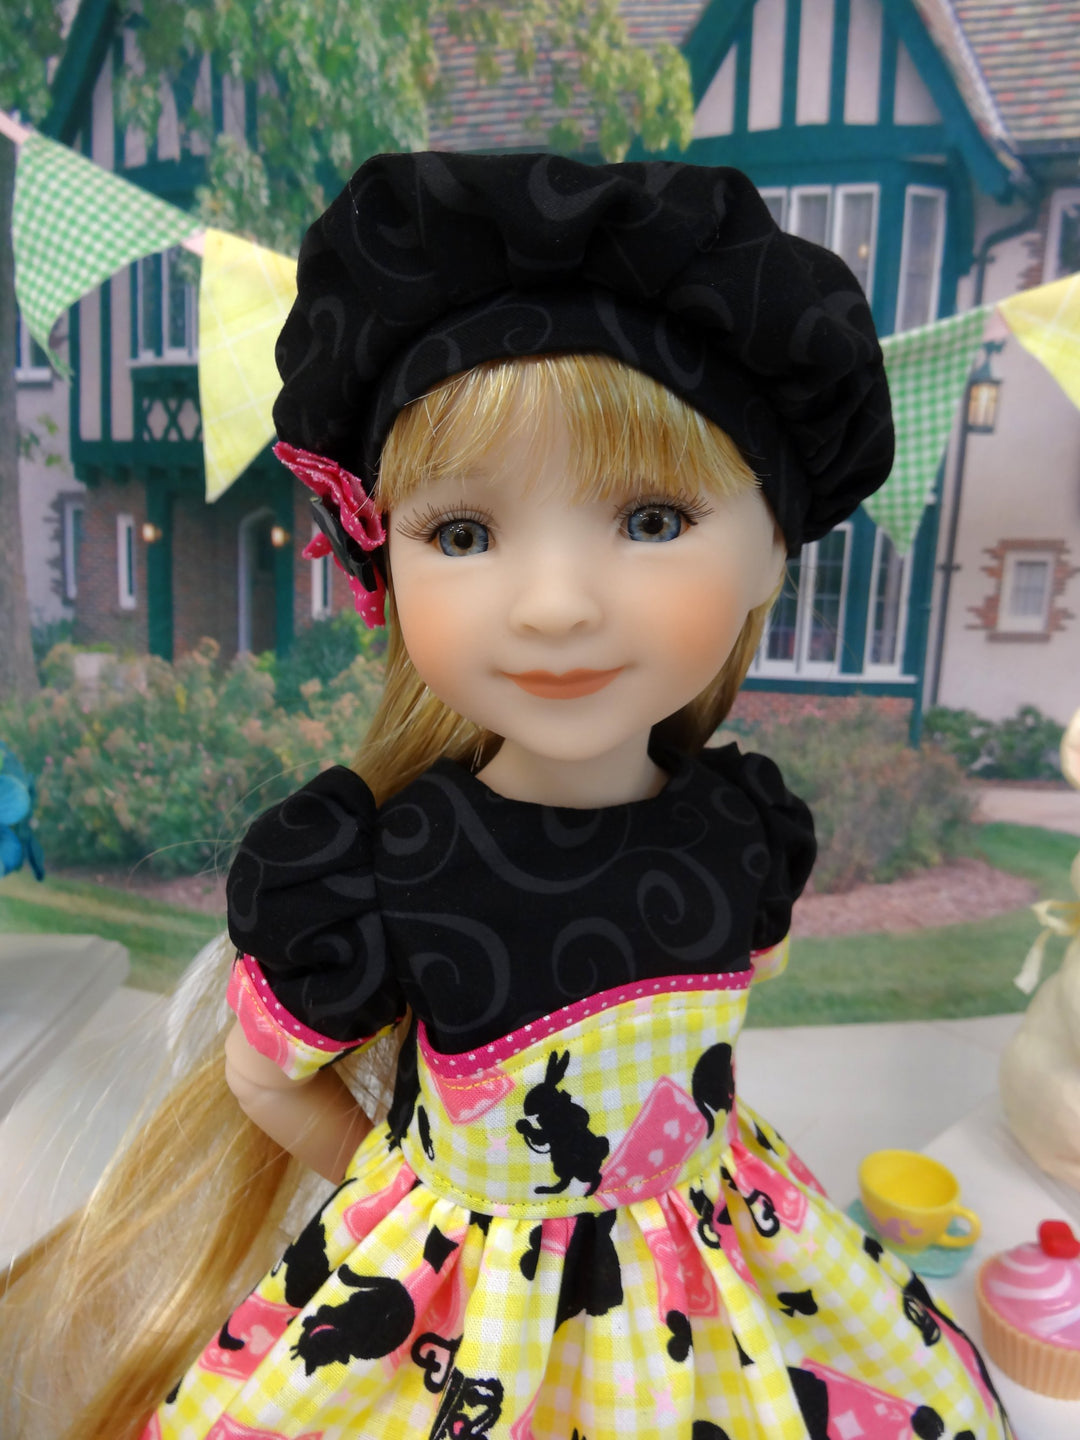 Wonderland Gingham - dress for Ruby Red Fashion Friends doll